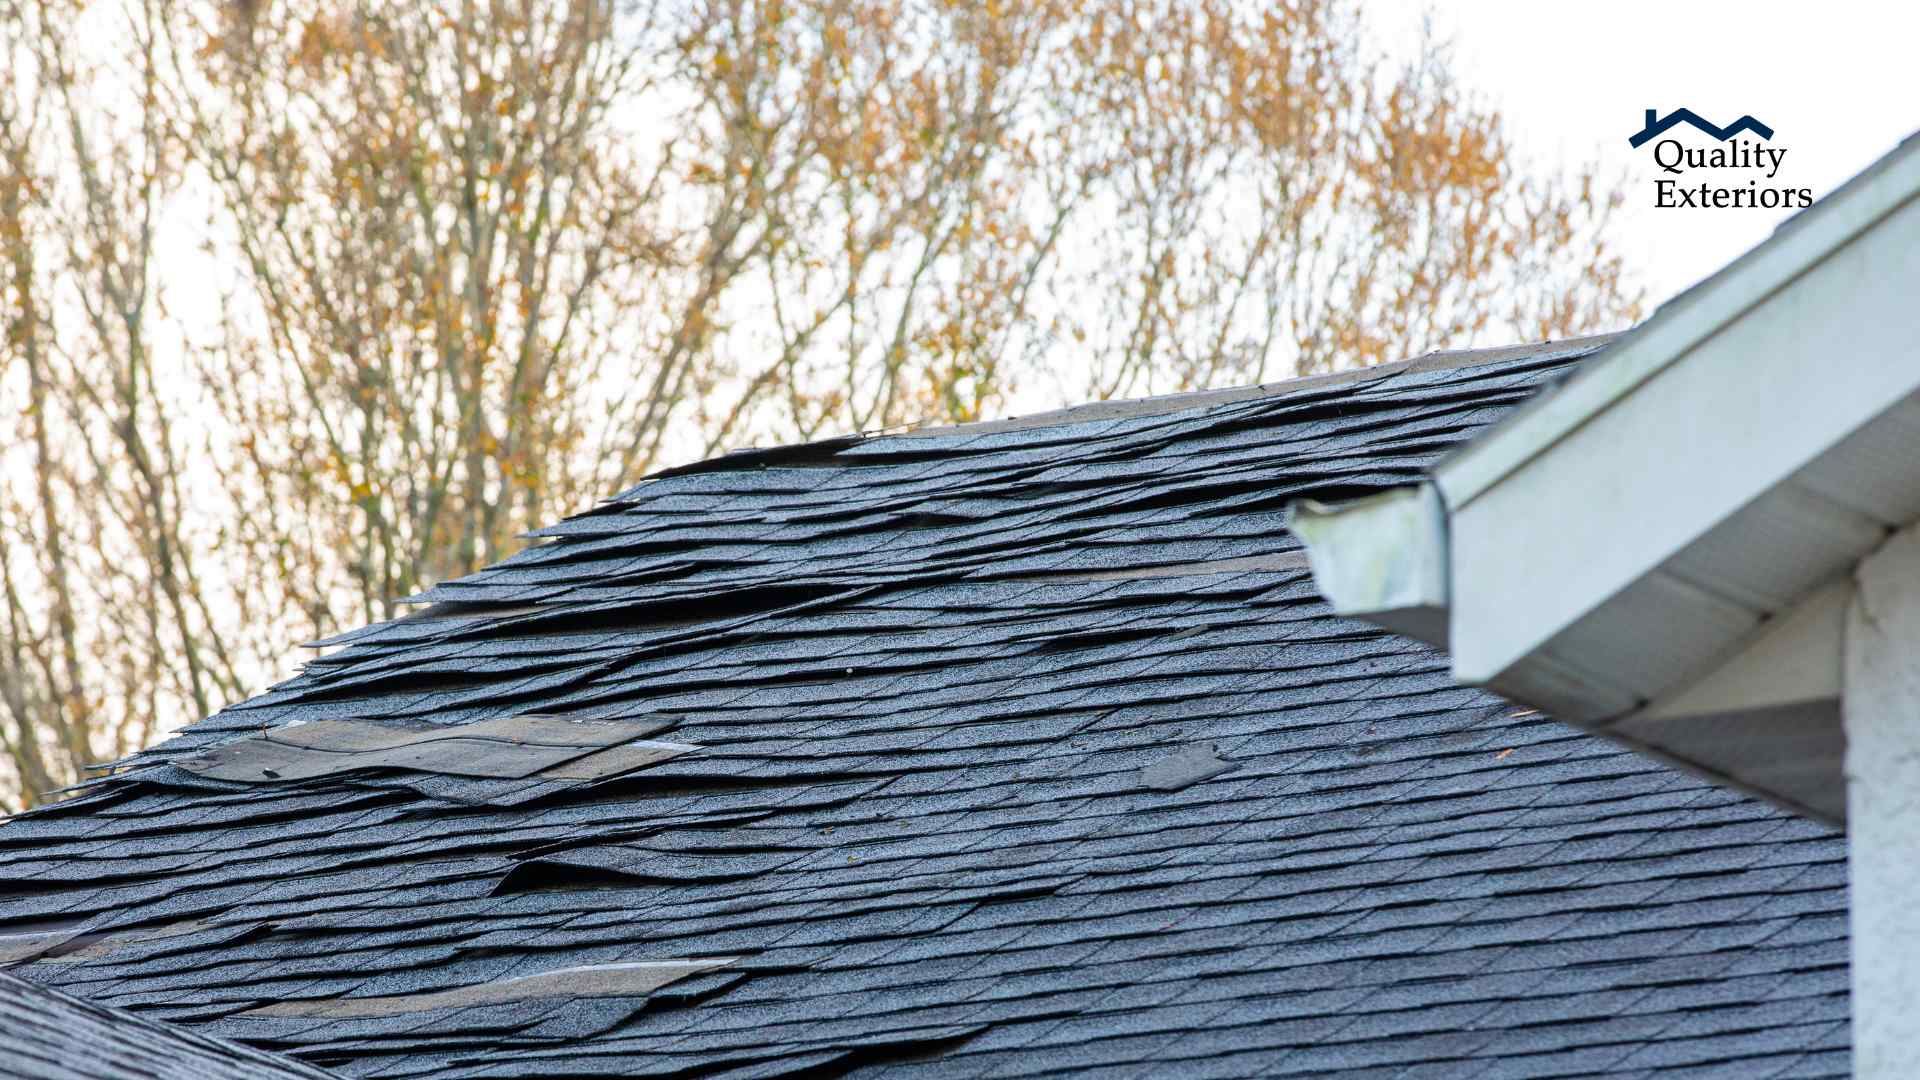 Causes of Roof Damage in Shreveport and Bossier City, LA